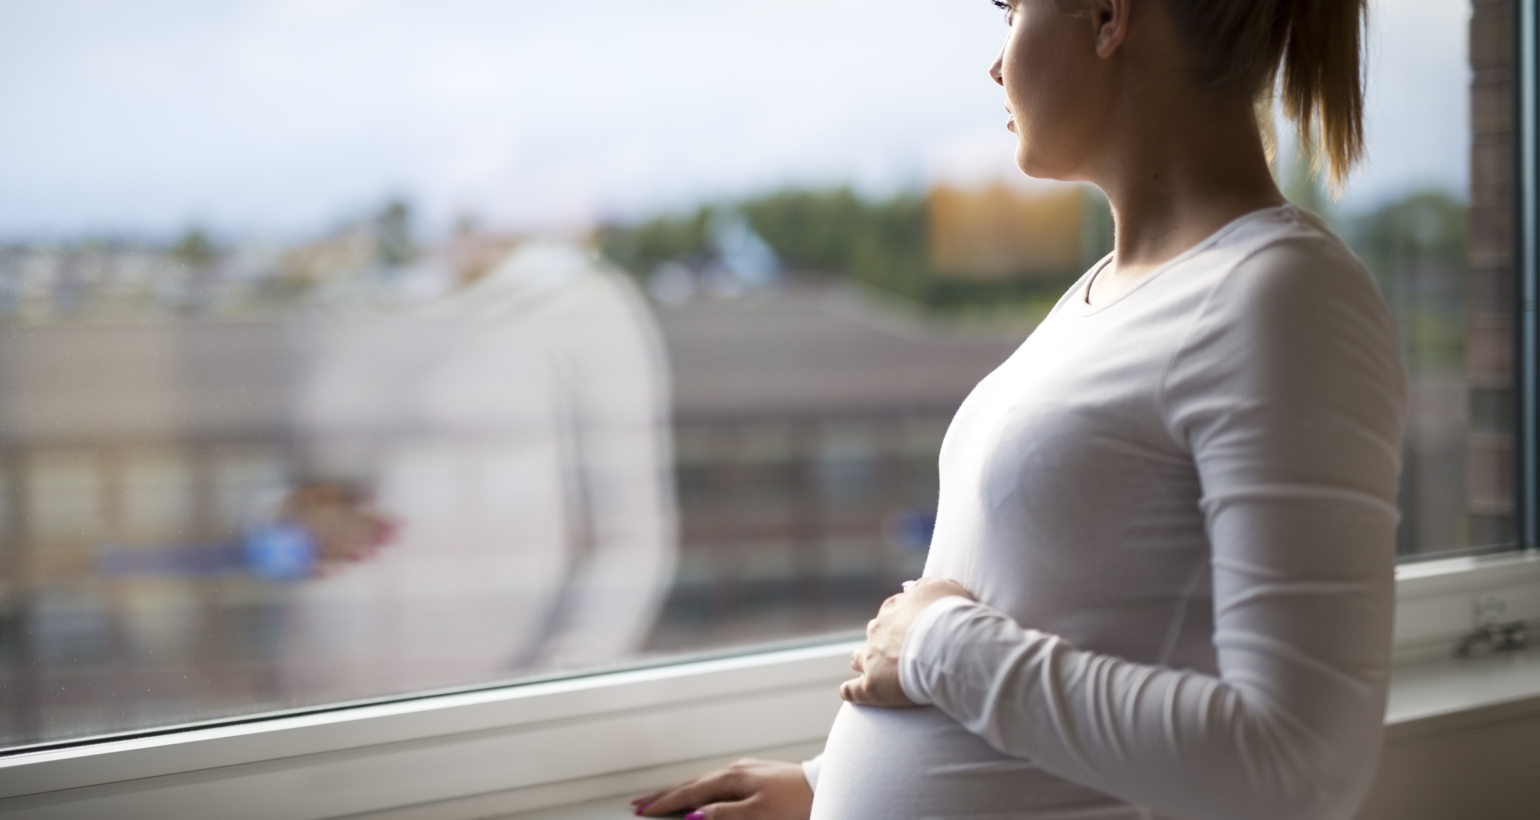 dangers of being pregnant vs birth control health risks side effects blood clots